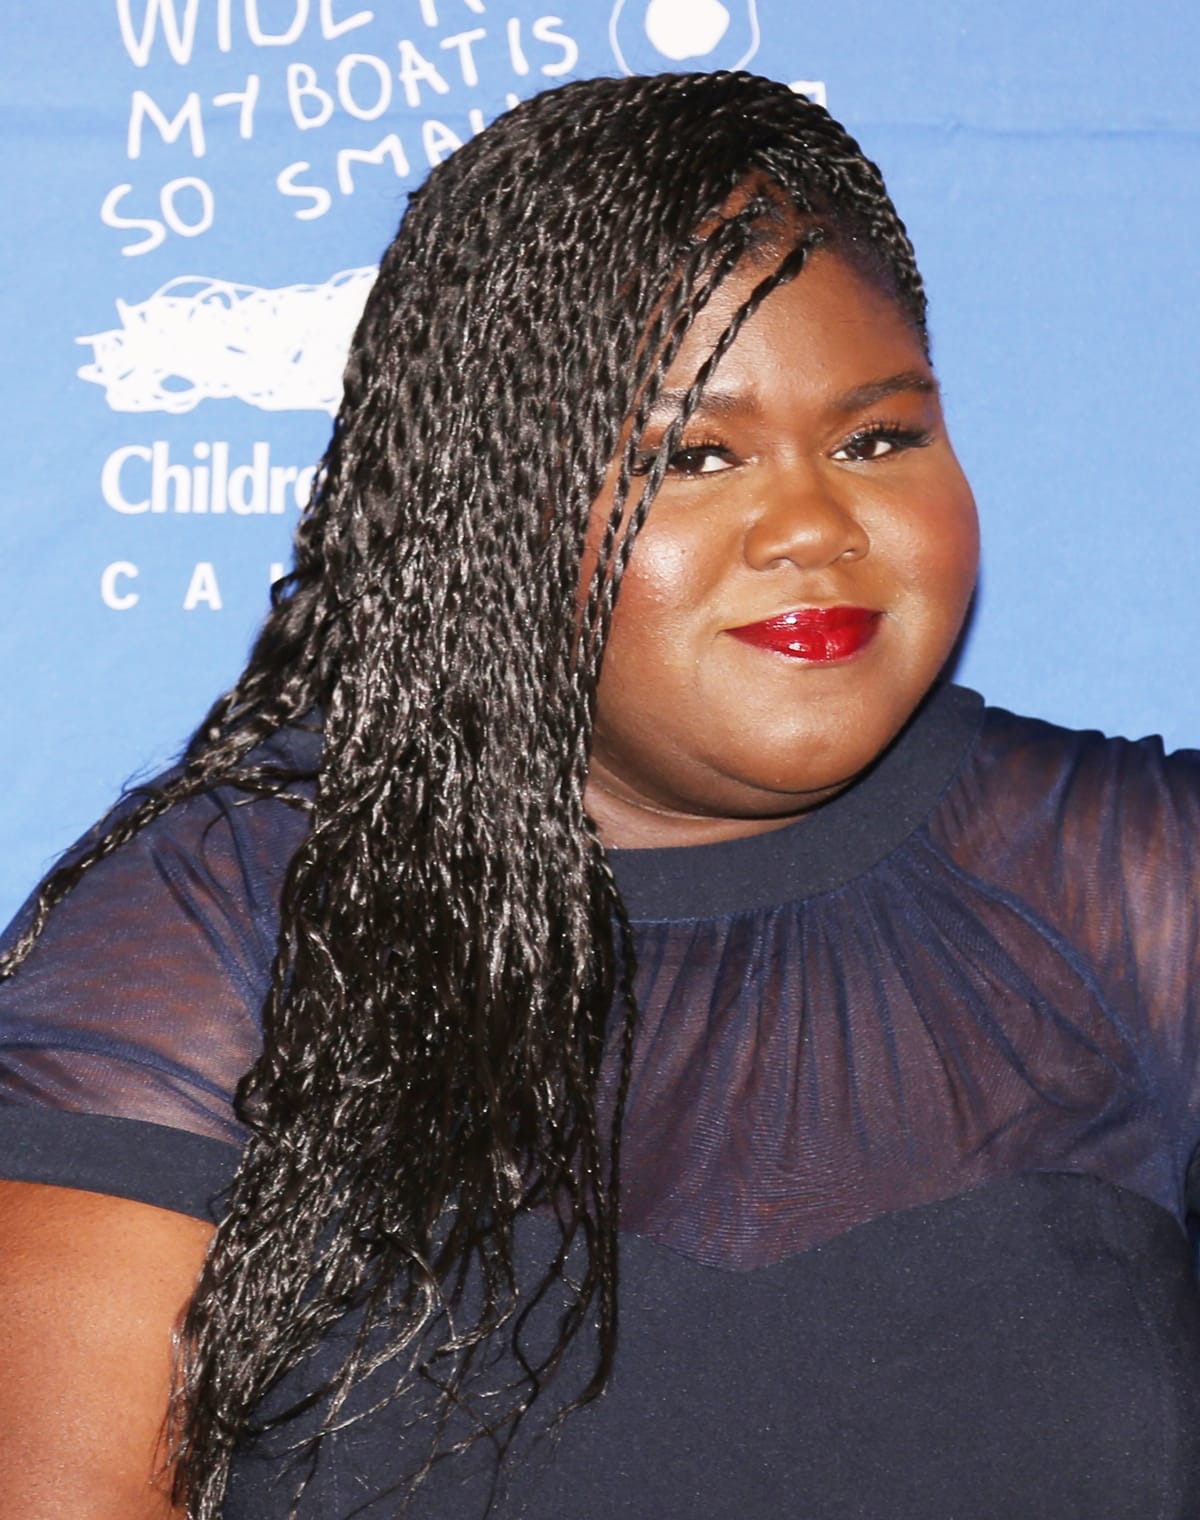 Gabourey Sidibe has been open about battling an eating disorder and depression